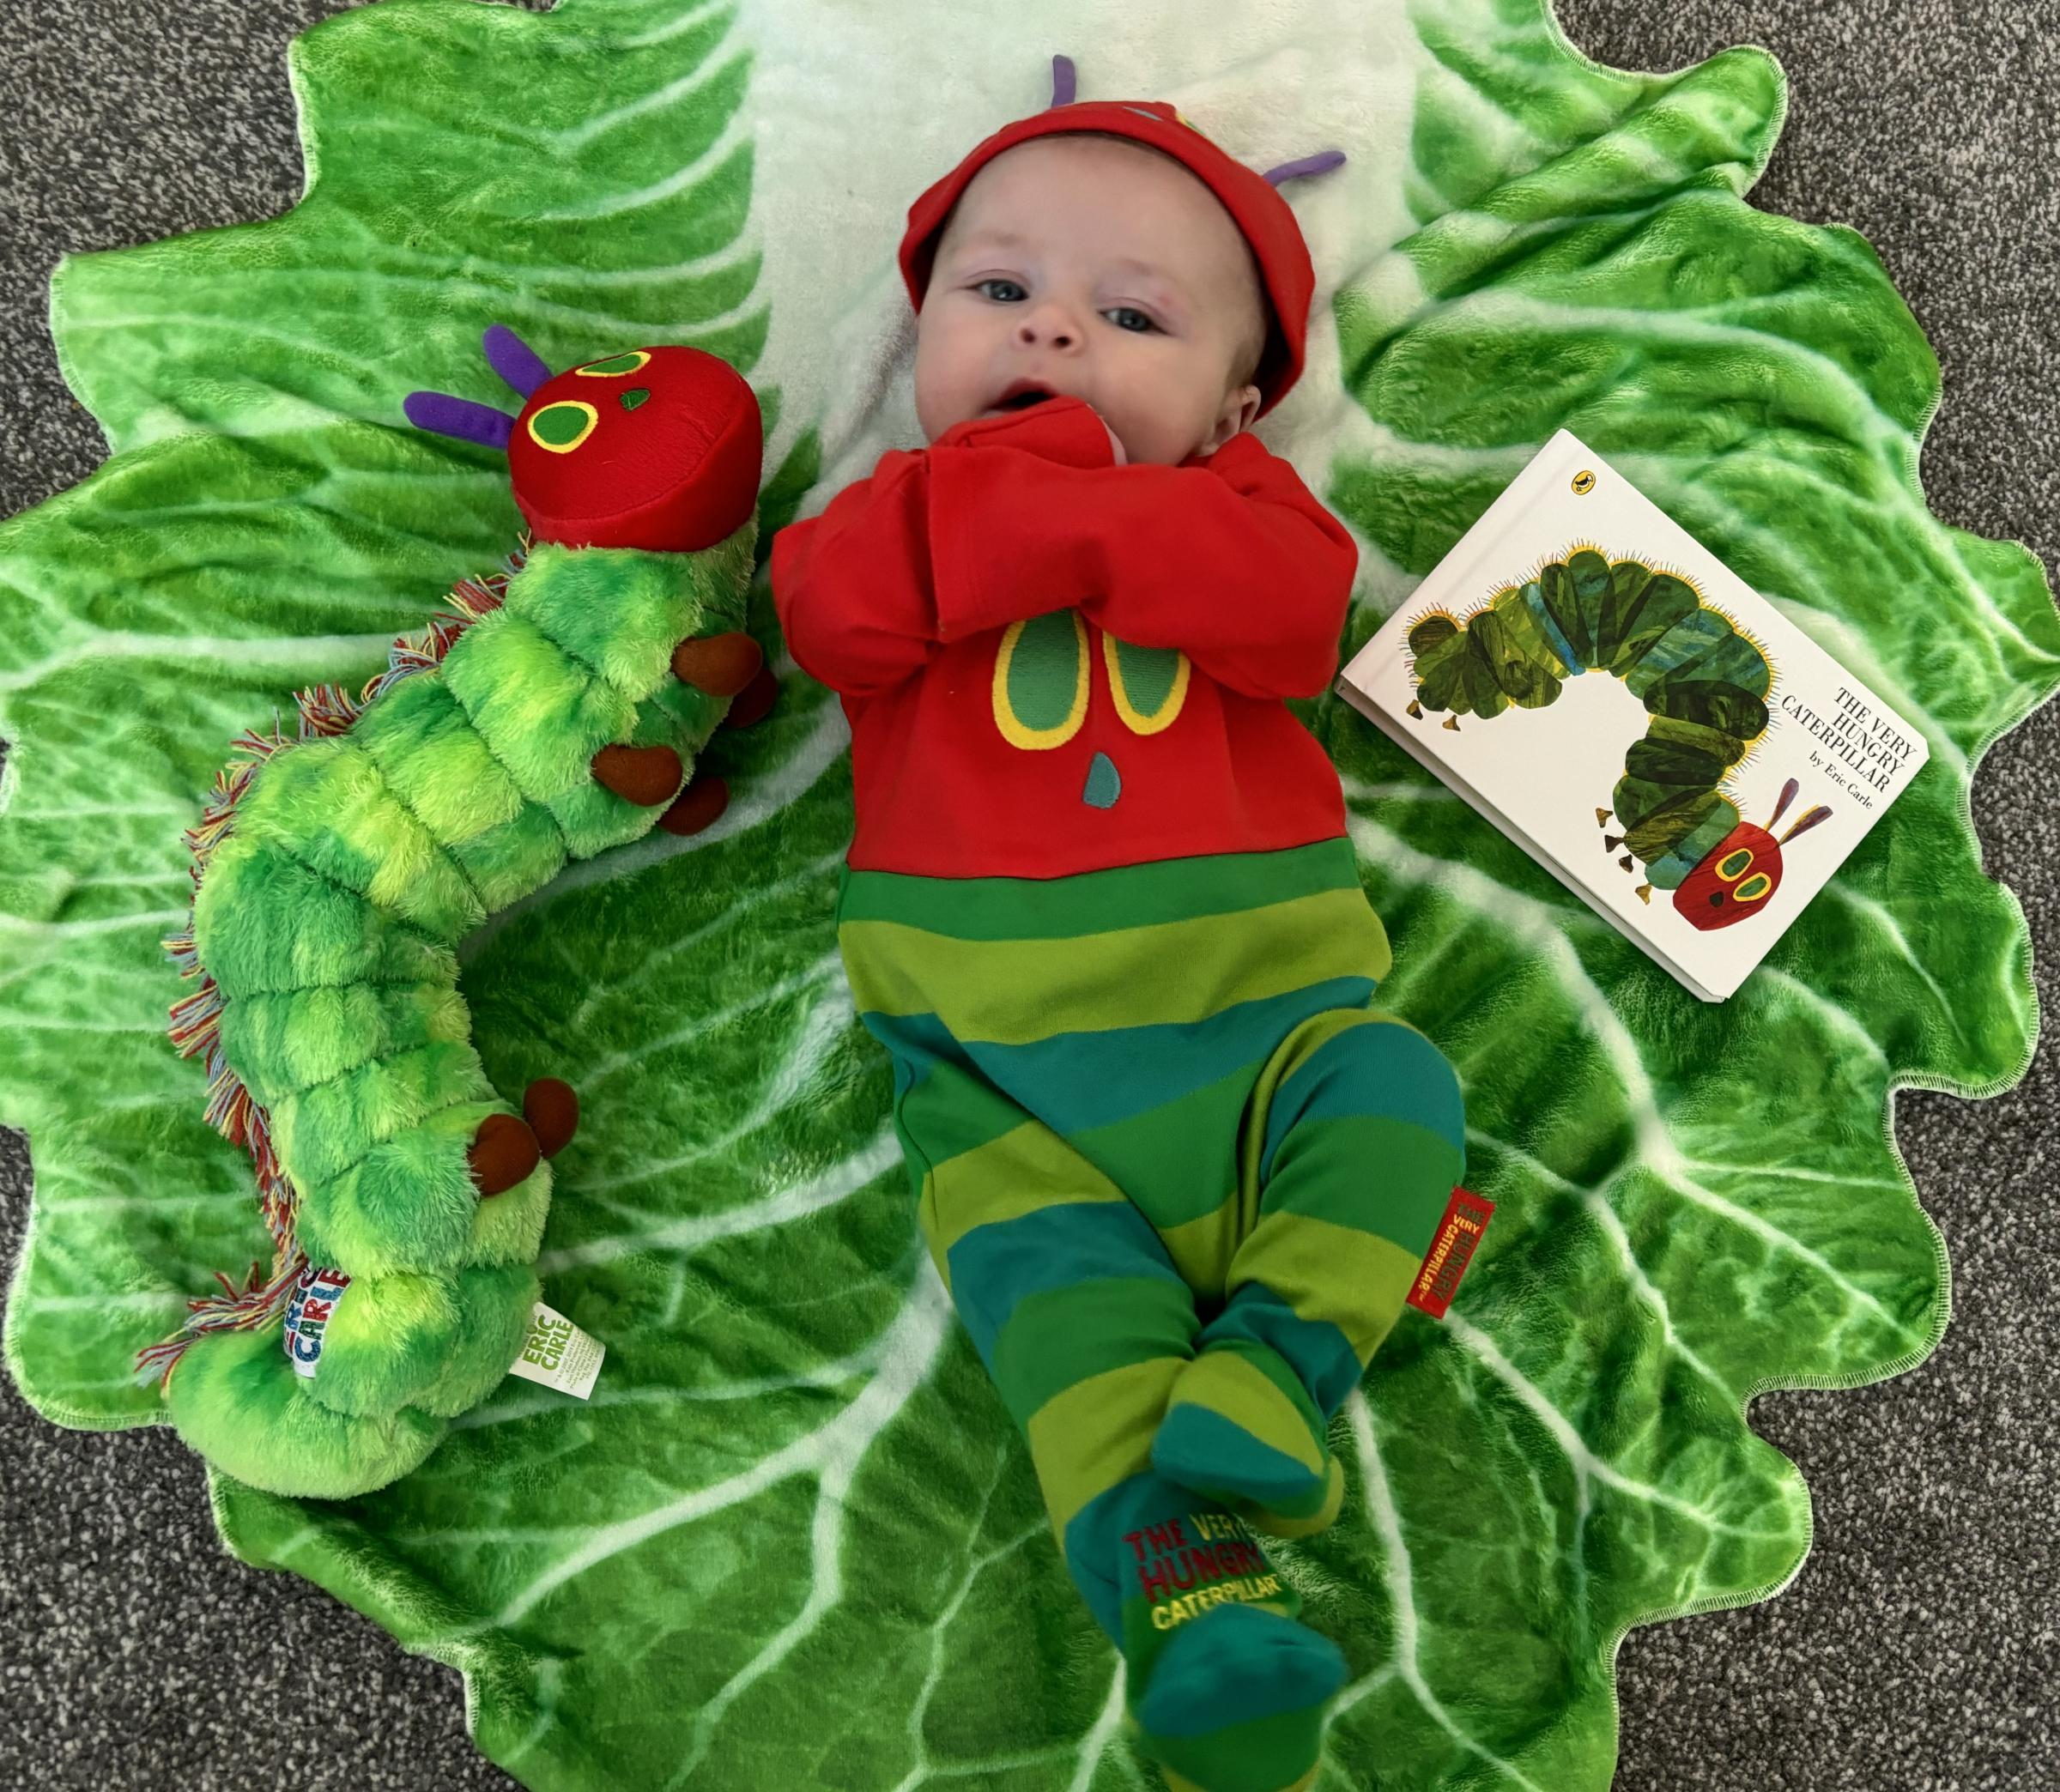 Three-month-old Luca from Rainhill as The Very Hungry Caterpillar